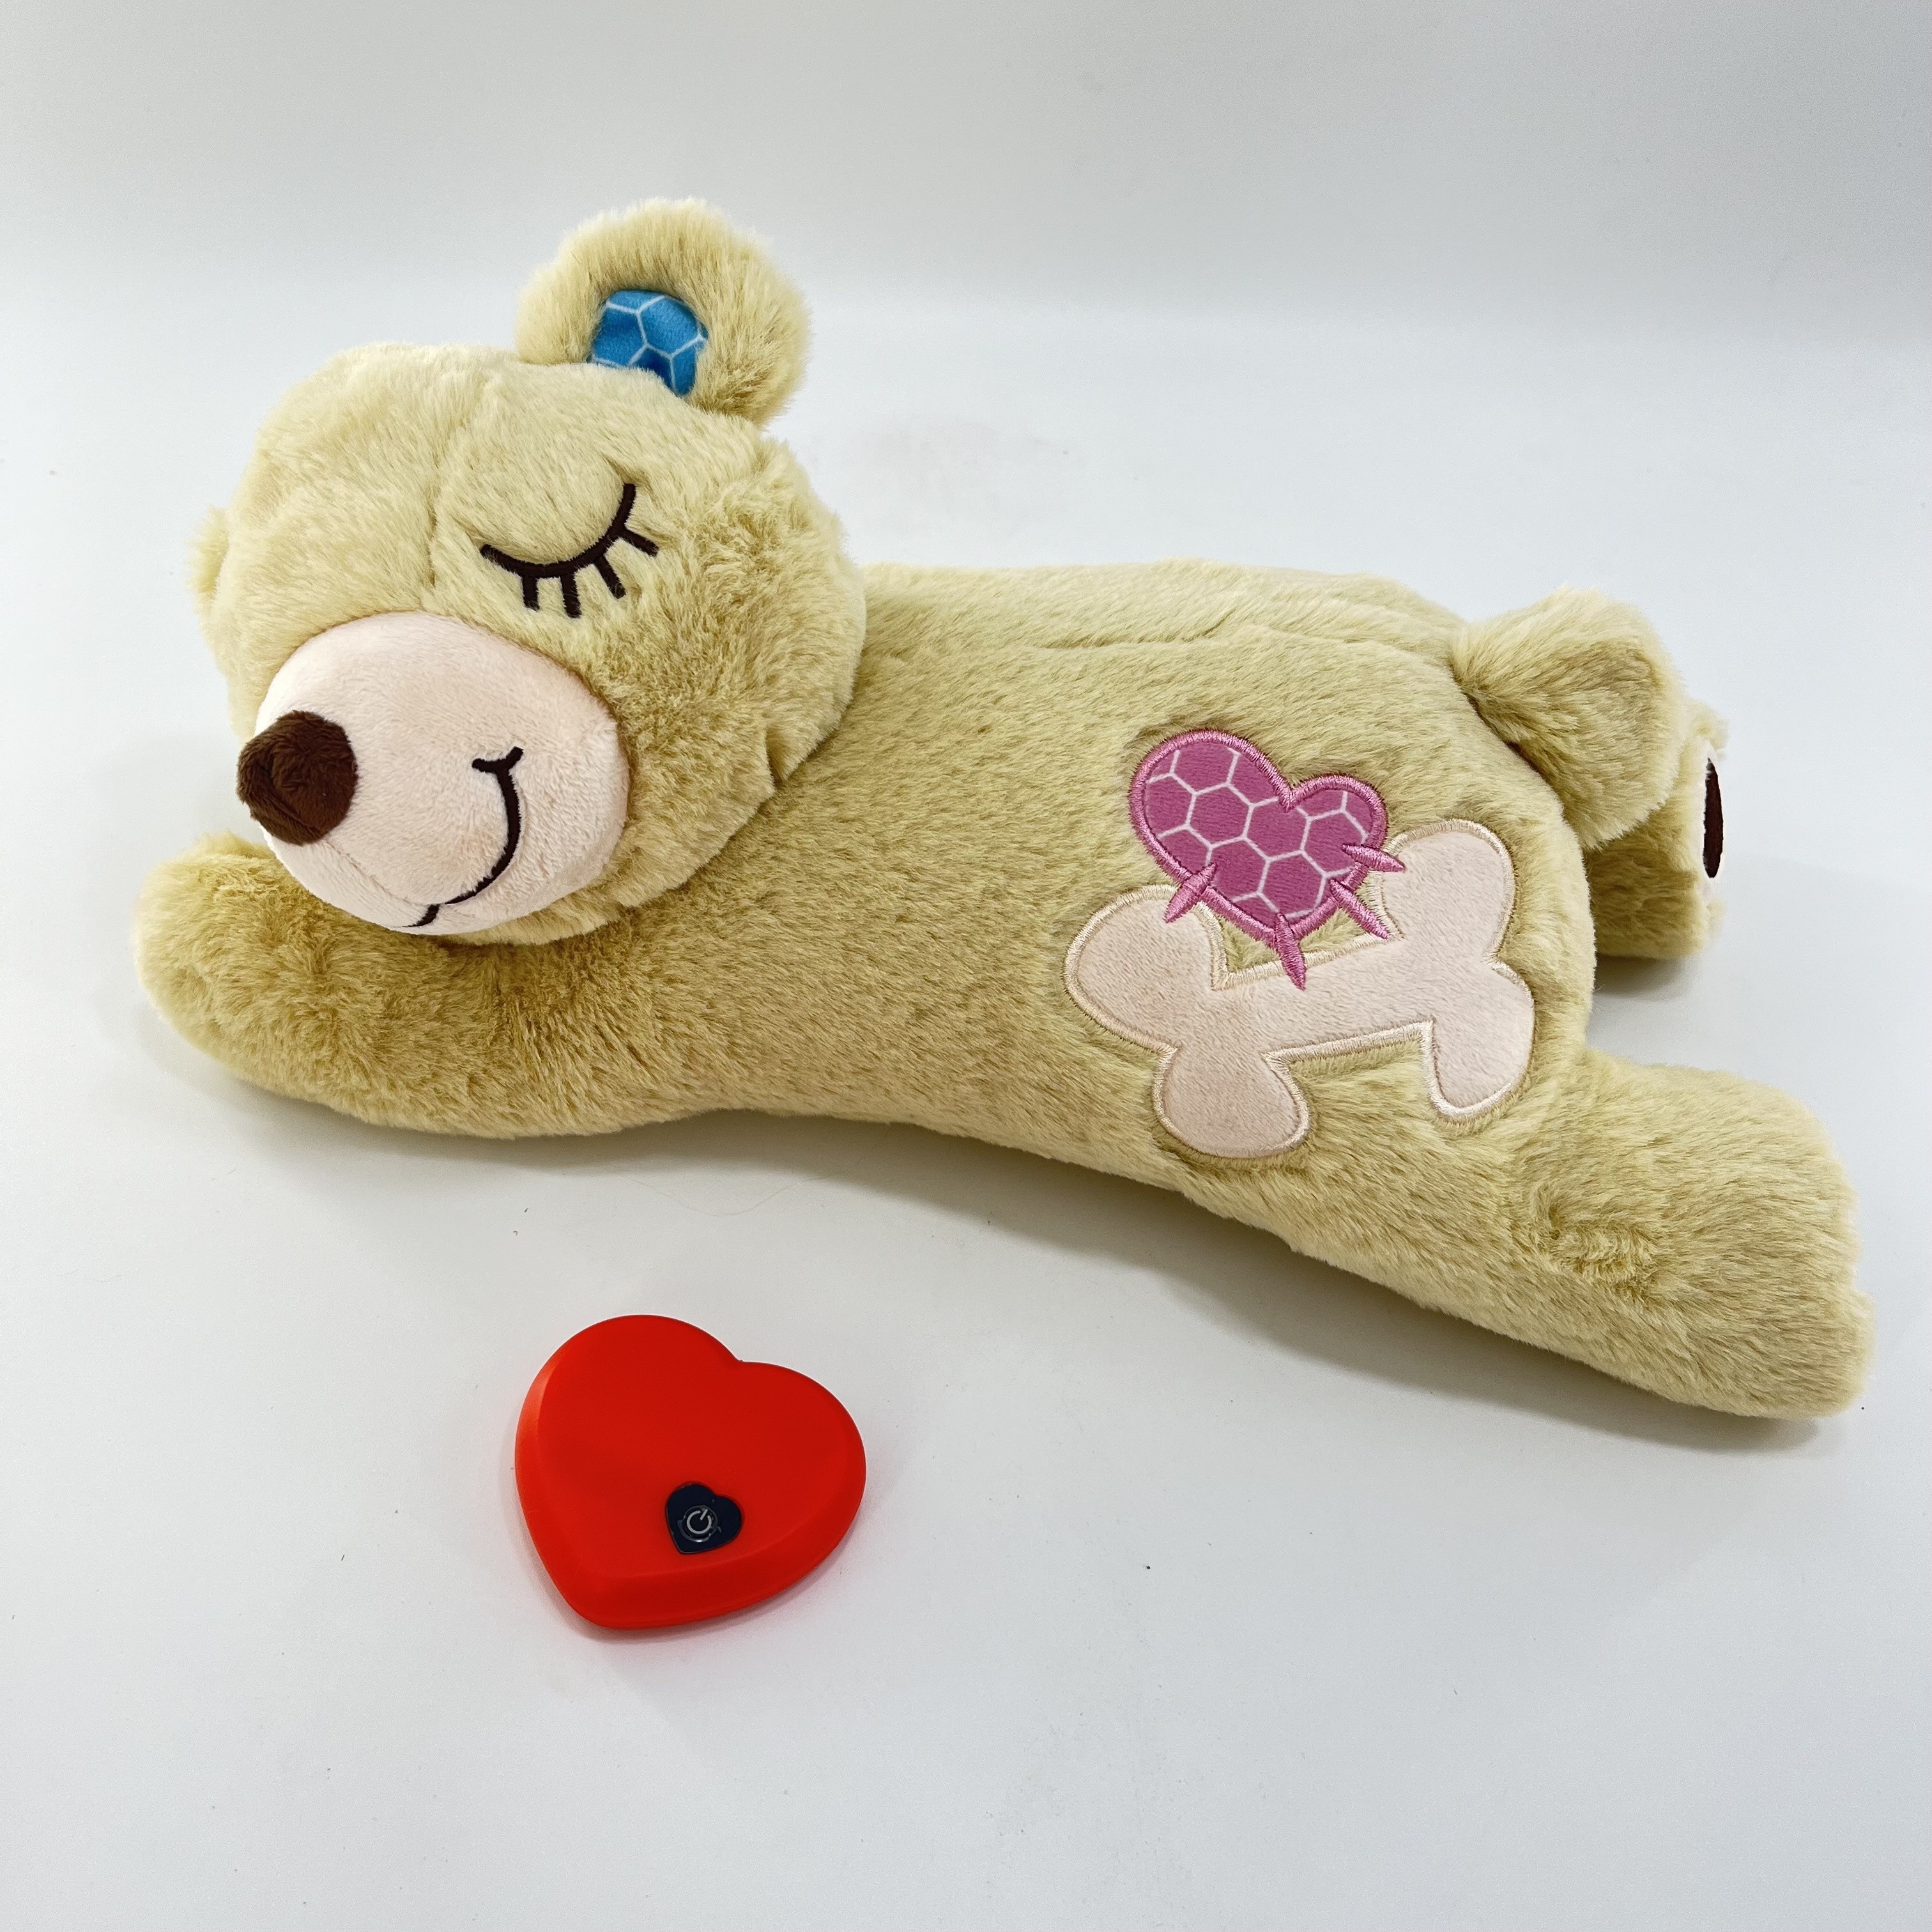 Heartbeat Dog Toy For Separation Anxiety Sleep Aid Soft Plush